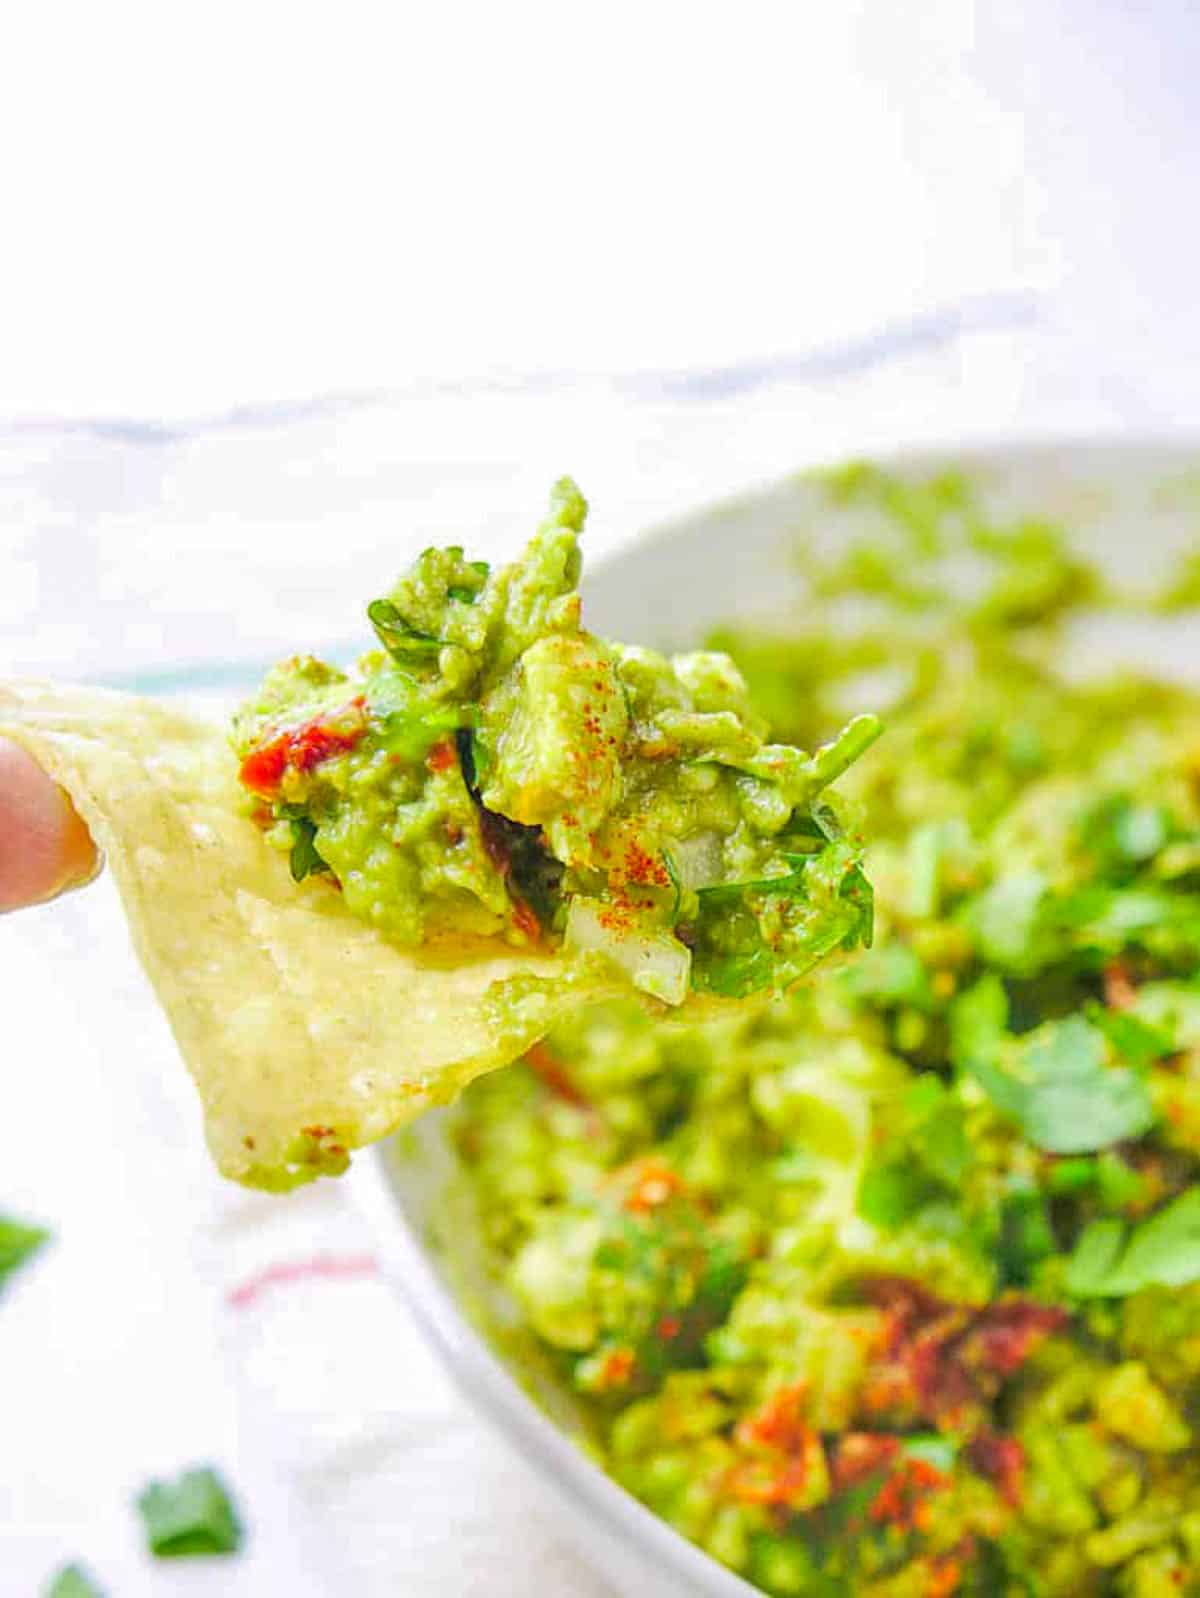 Tortilla chip with low calorie guacamole on it, ready to be eaten.